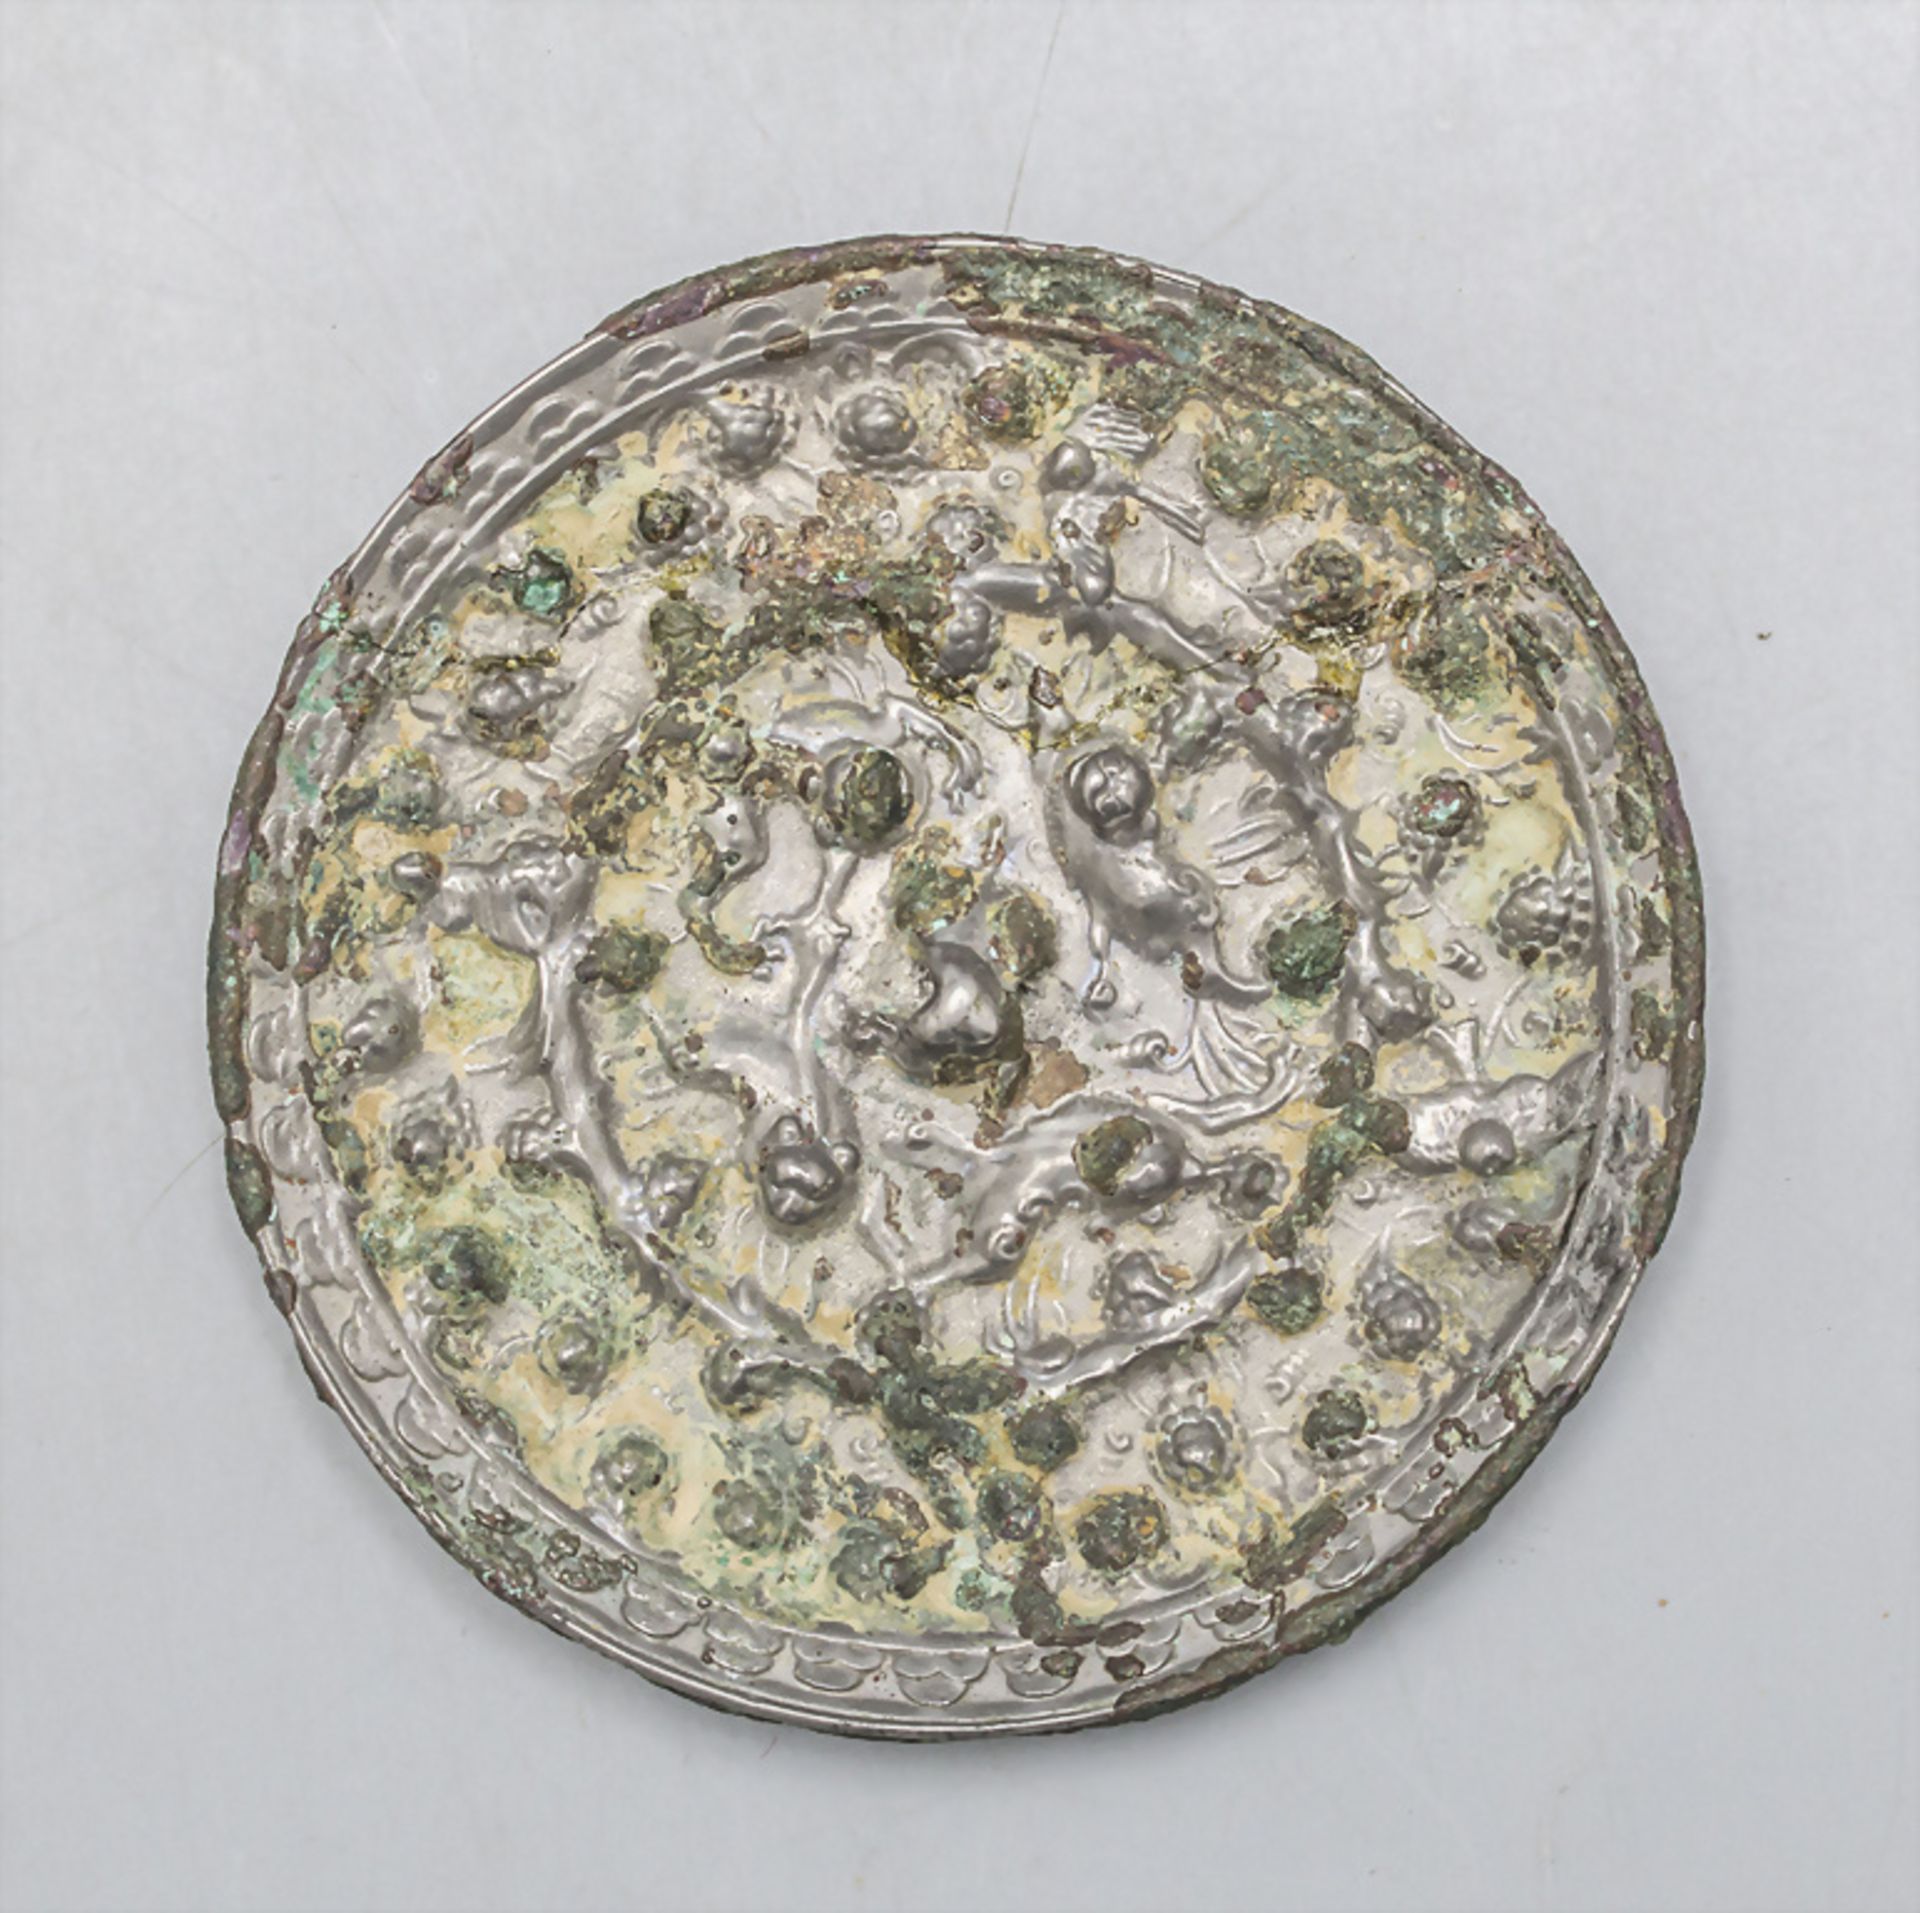 Spiegel / A mirror, China, wohl Tang-Dynastie (618-906 n.Chr.) - Image 3 of 5